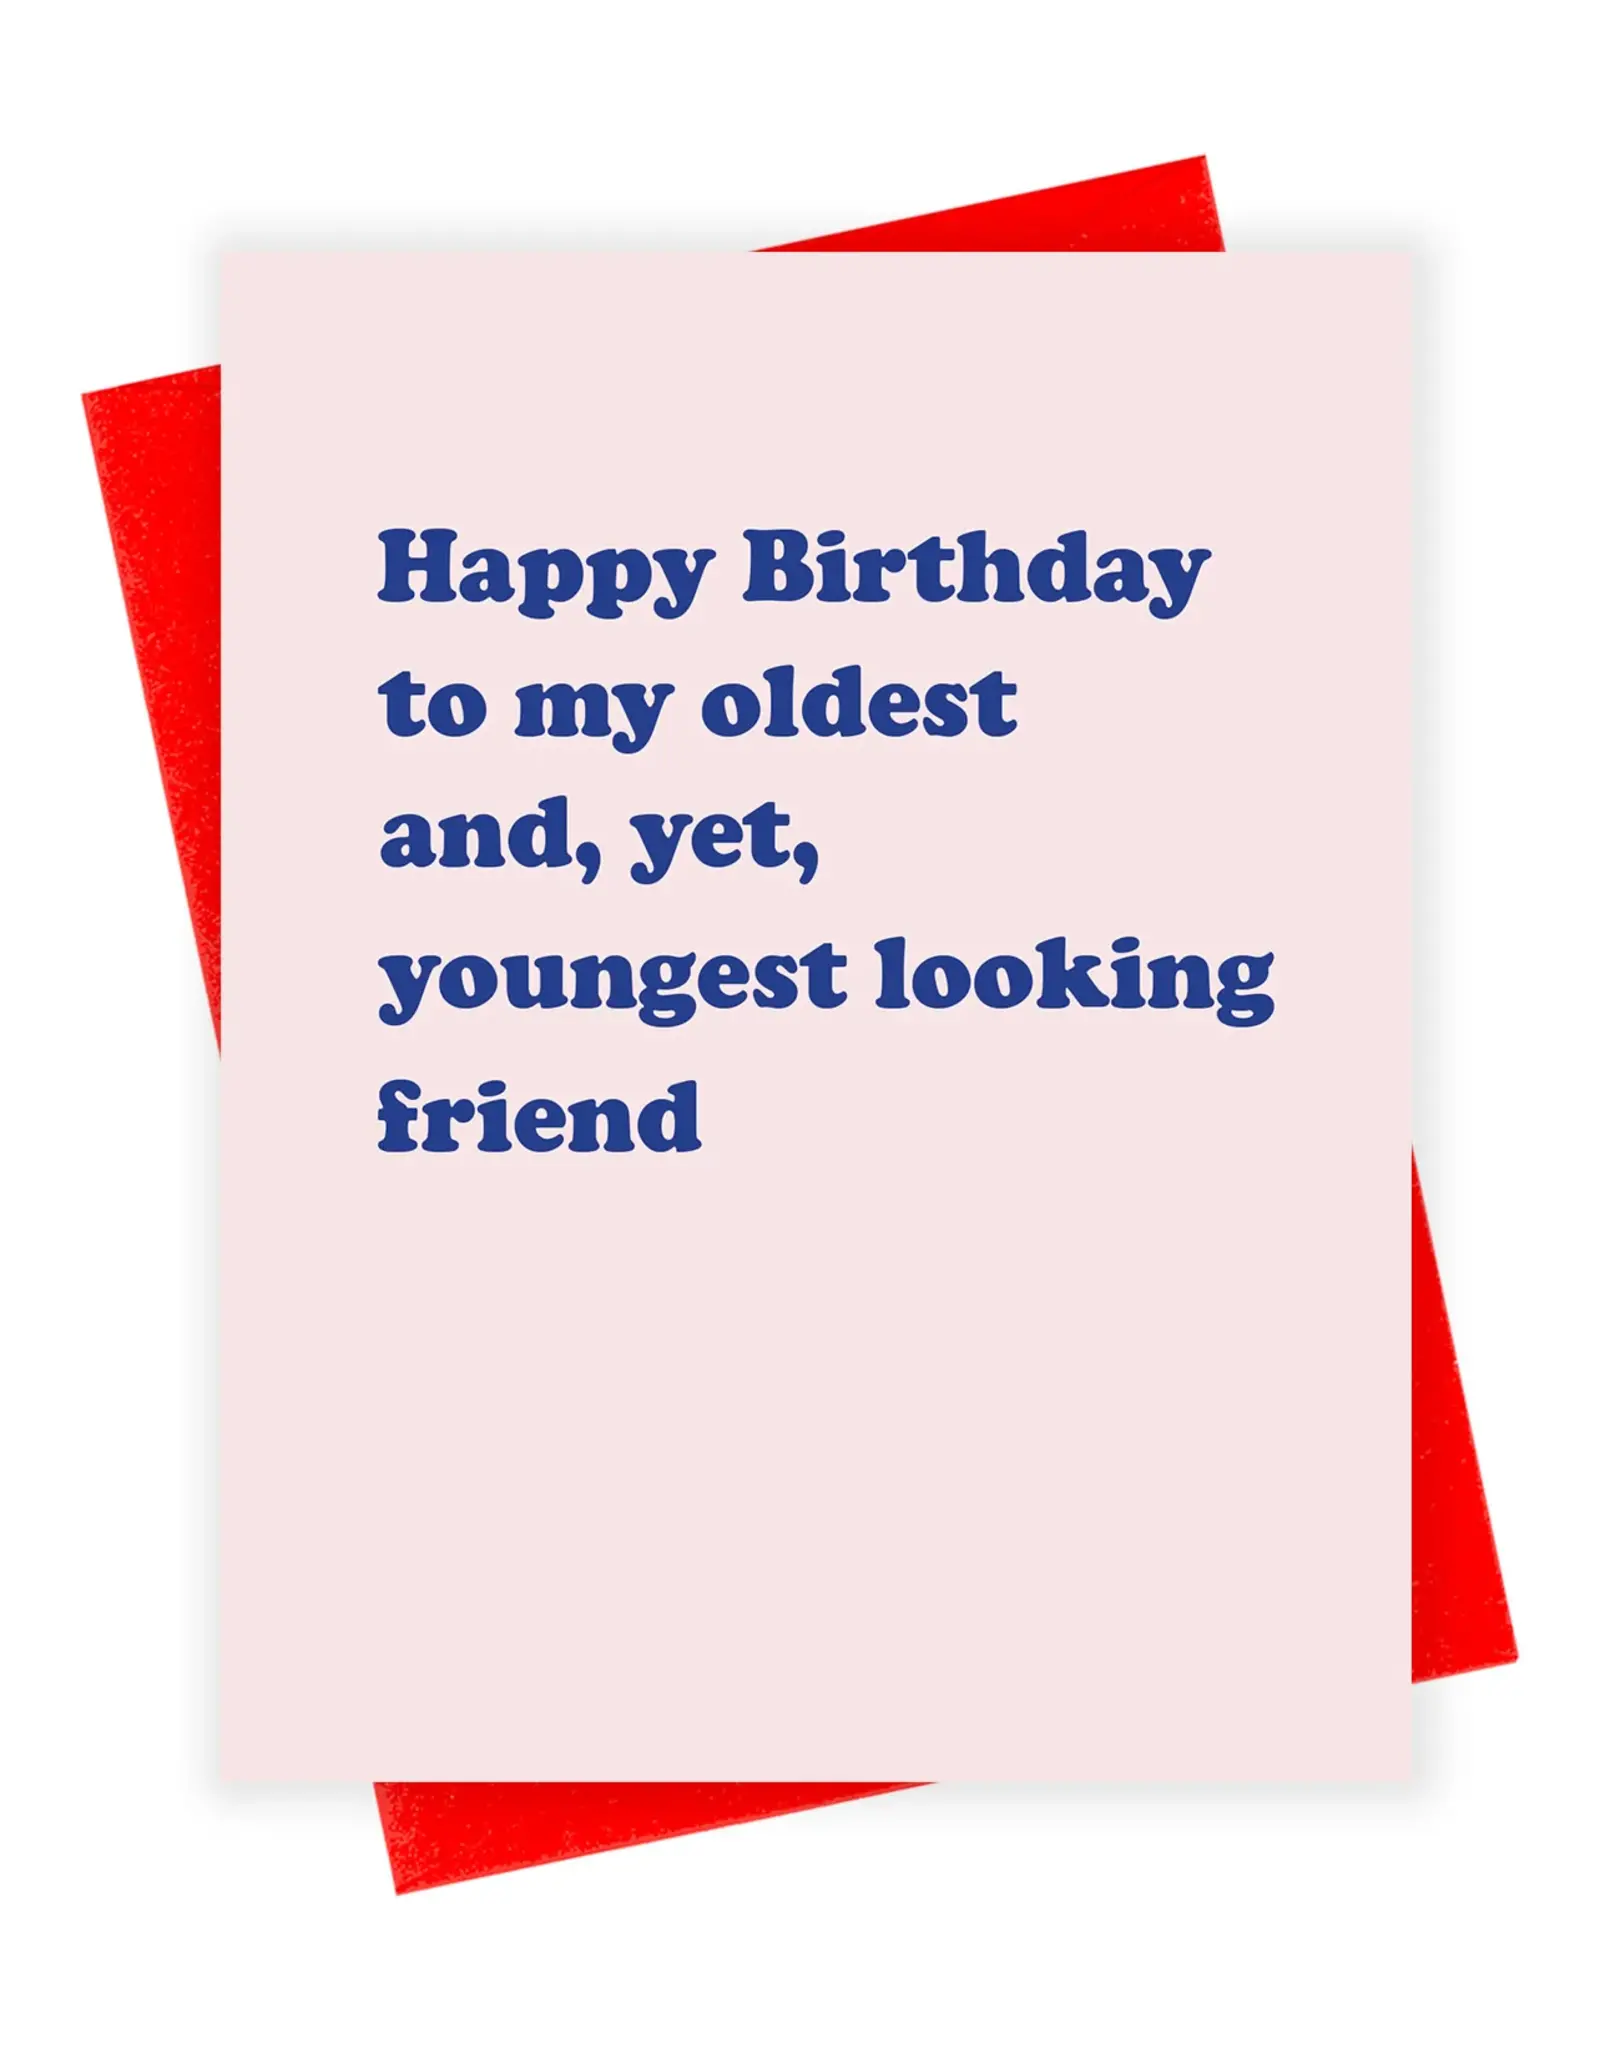 xou Card - Birthday: Oldest  Youngest